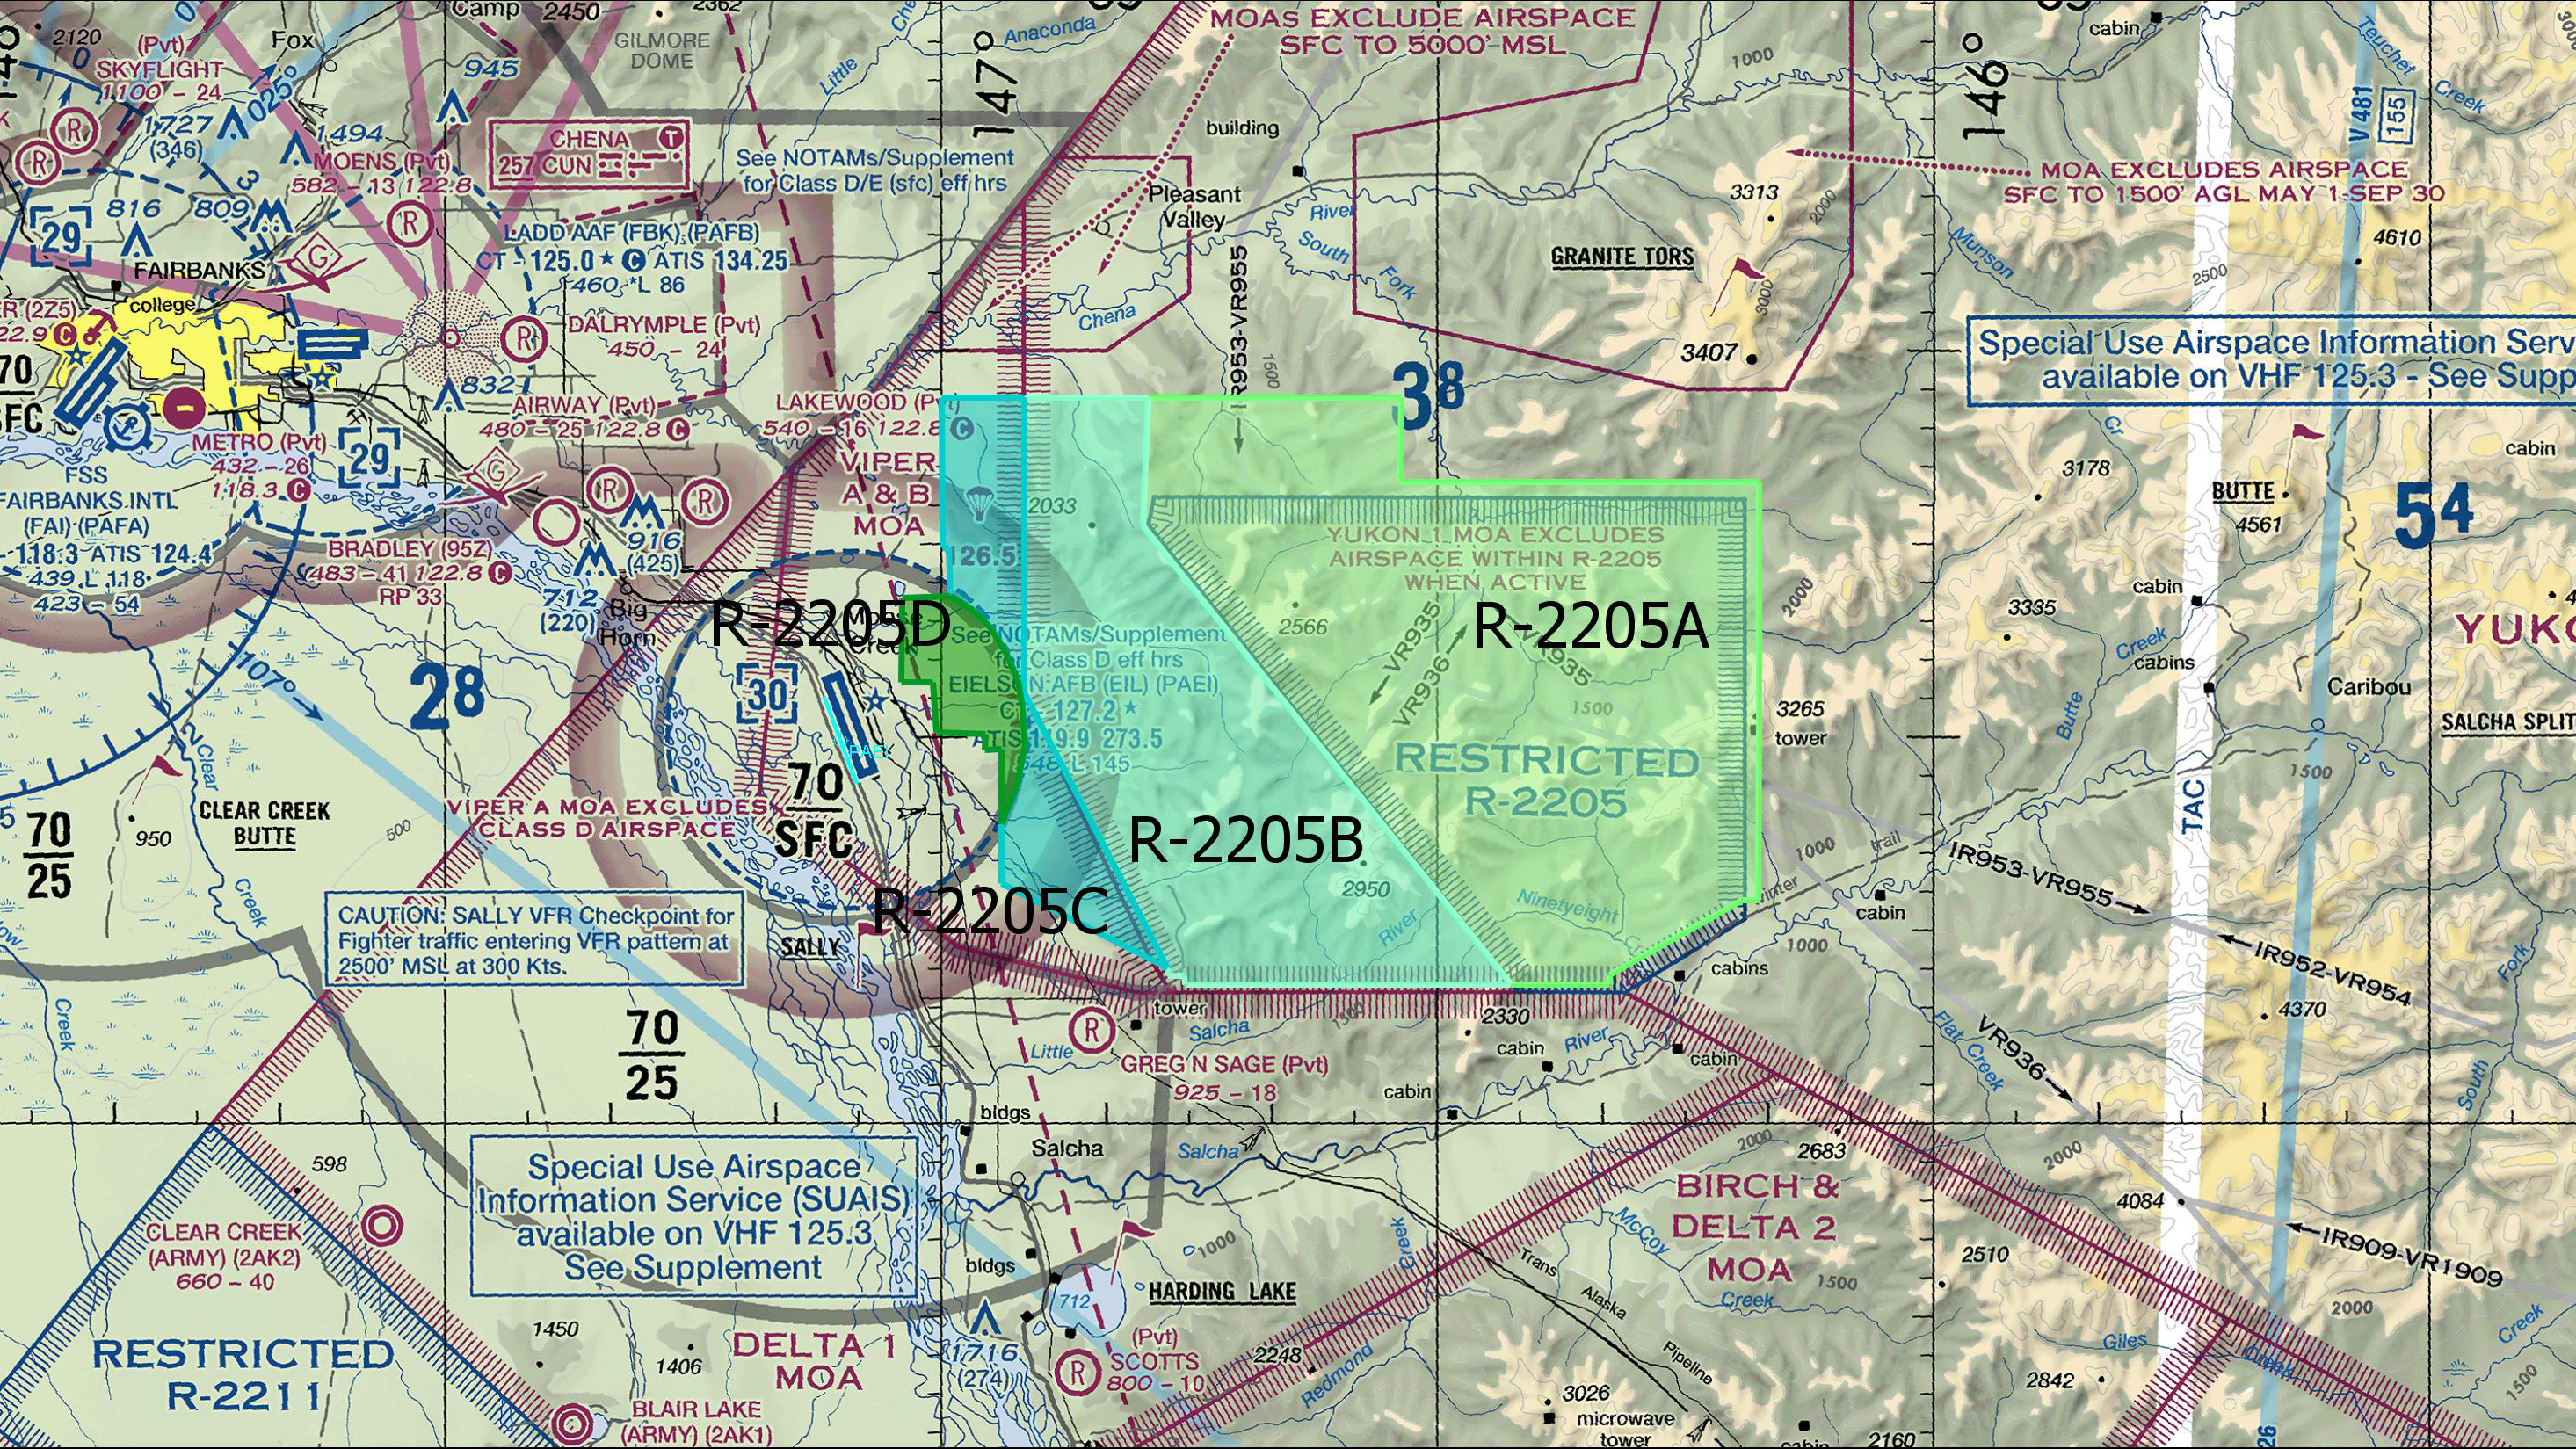 AOPA graphic illustrating FAA proposed restricted area R-2205A, B, C, and D which would extend to the north east and southeast of Eilson Air Force Base, Alaska.